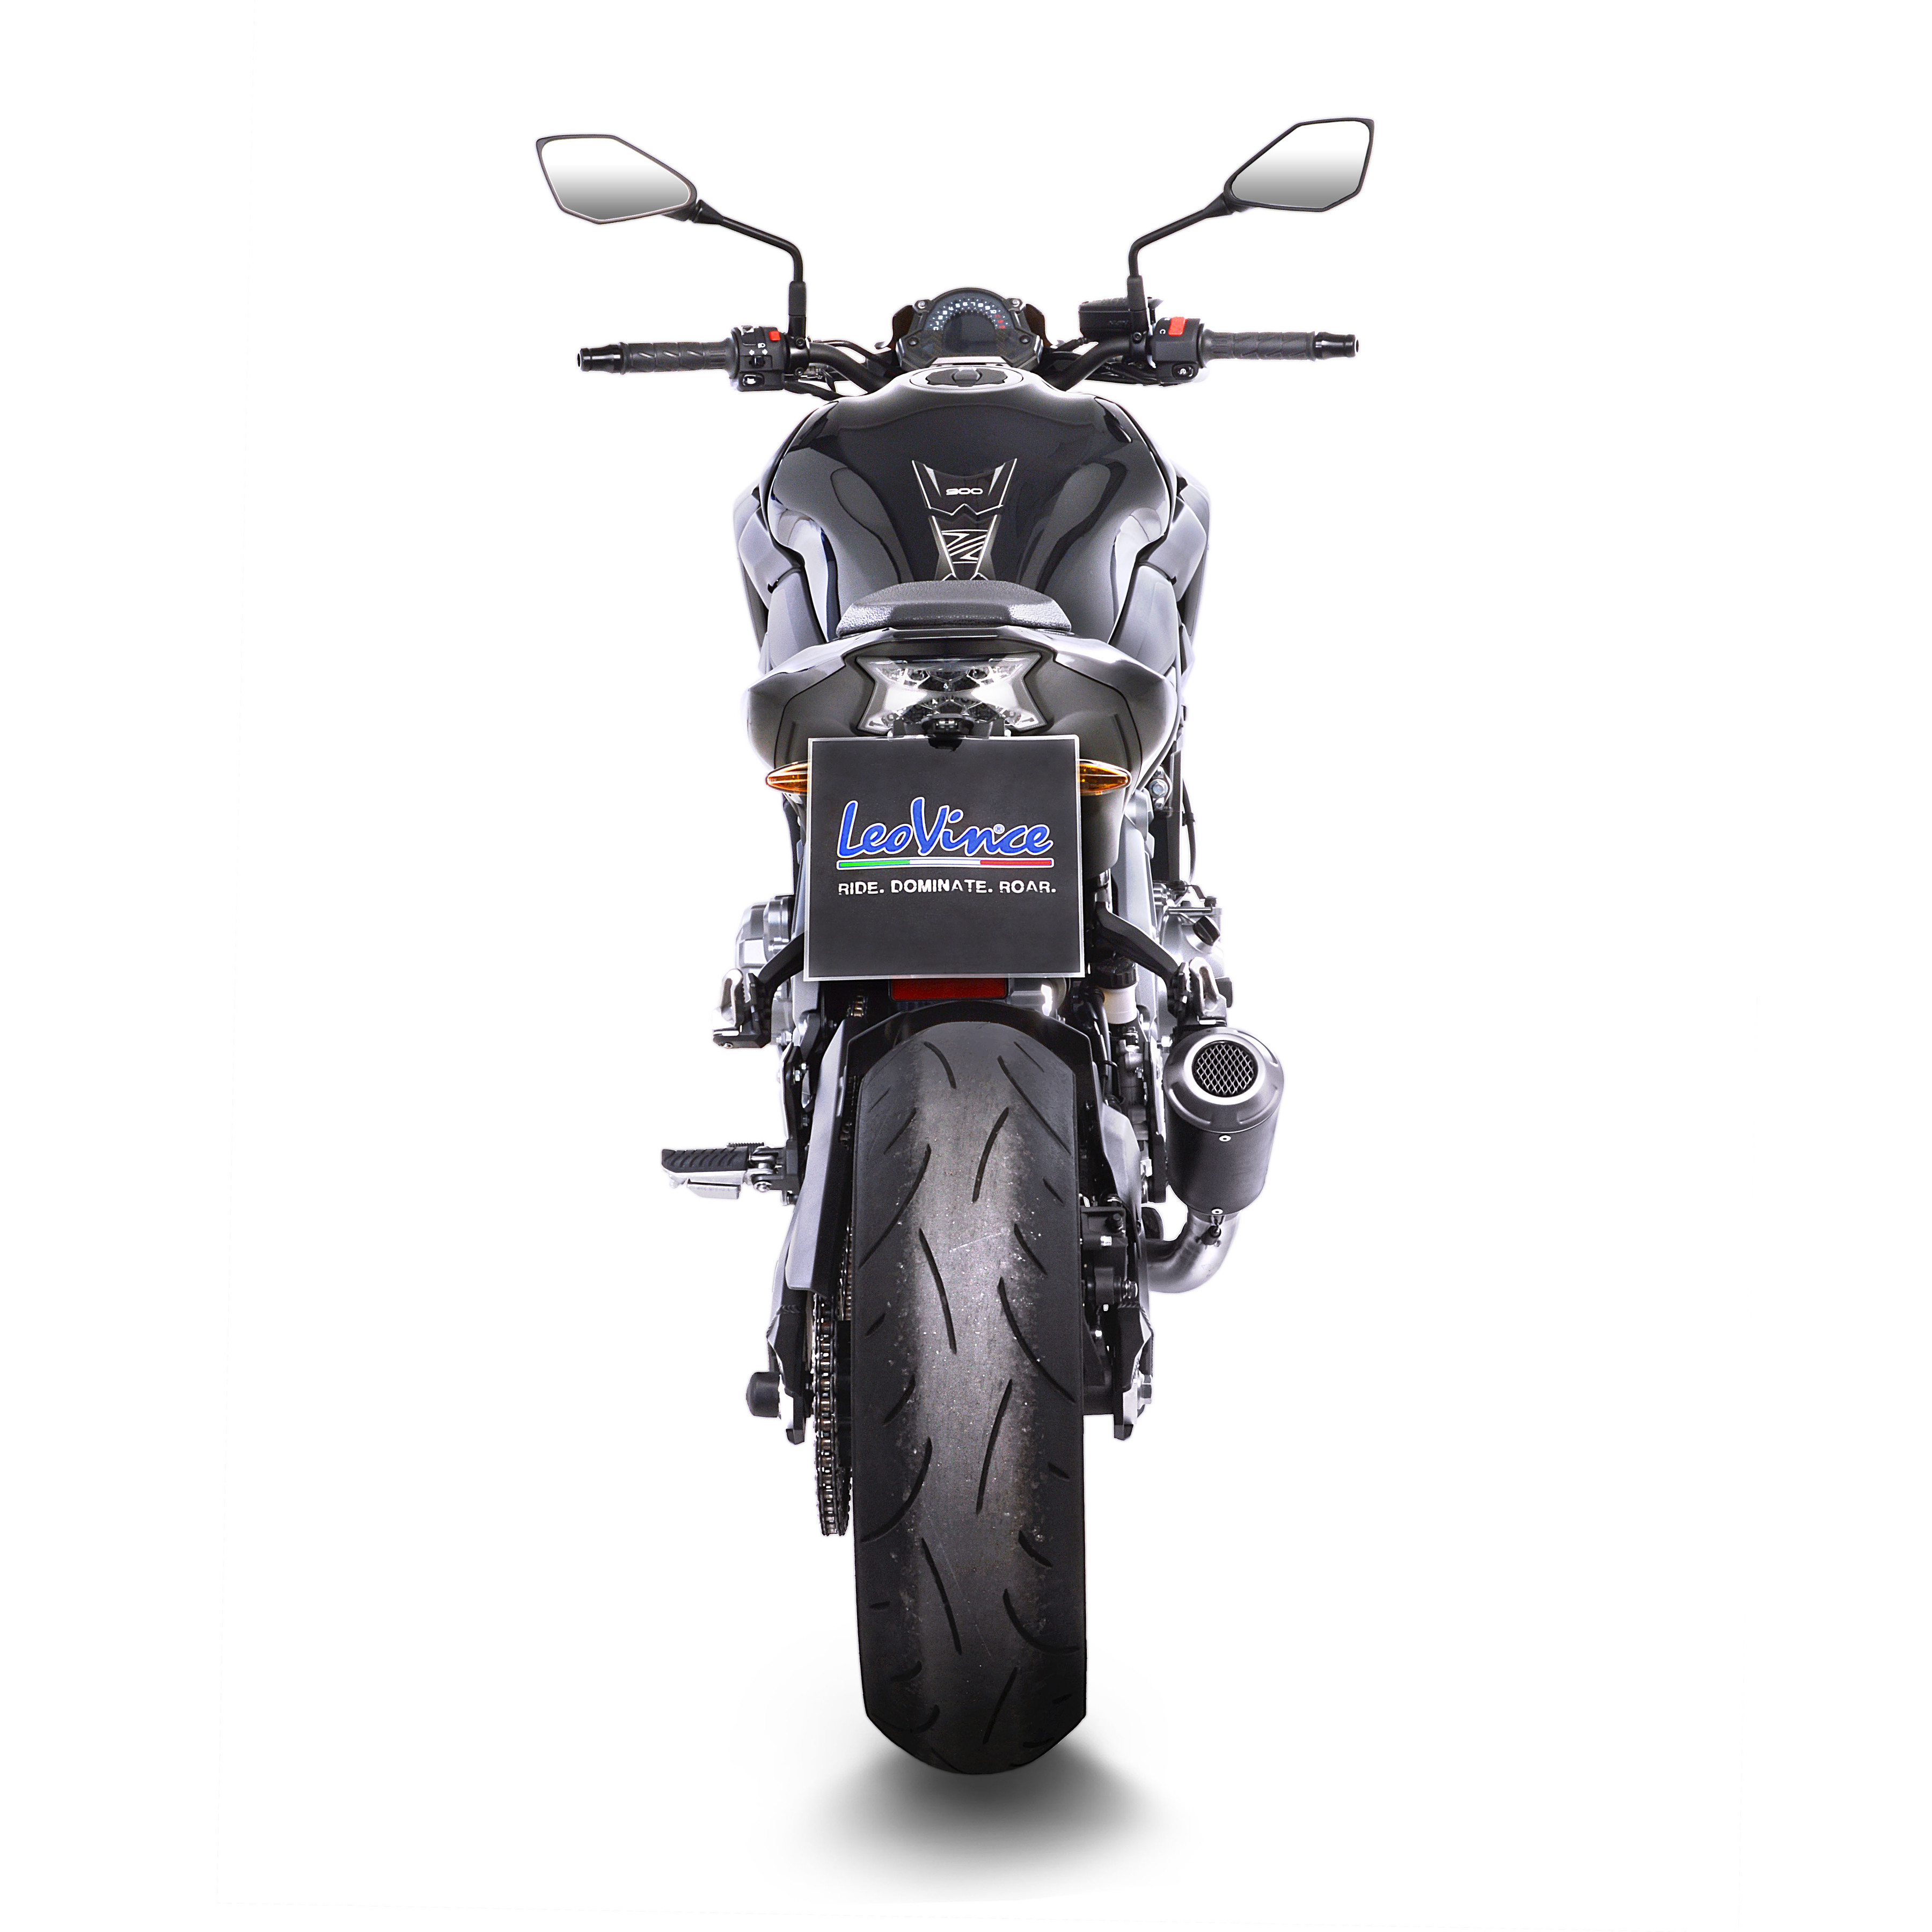 LV-10 Black Stainless Steel Slip On Exhaust w/ Carbon Fiber Trim - For 17-21 Kawasaki Z900 - Click Image to Close